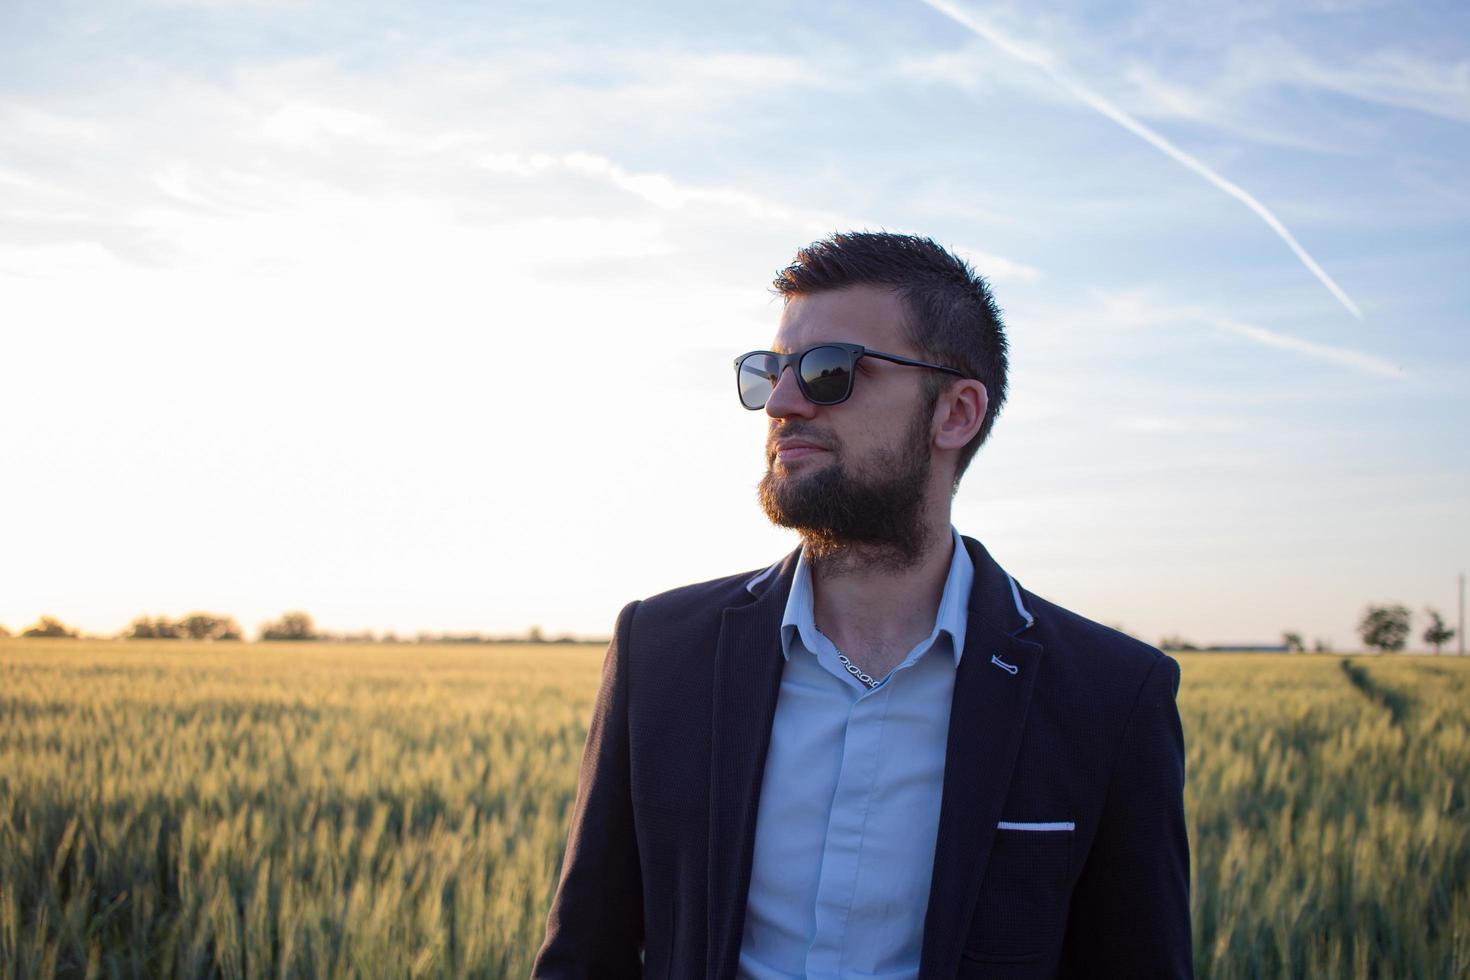 portrair of young man in suit and sun glasses, summer wheat fields background photo